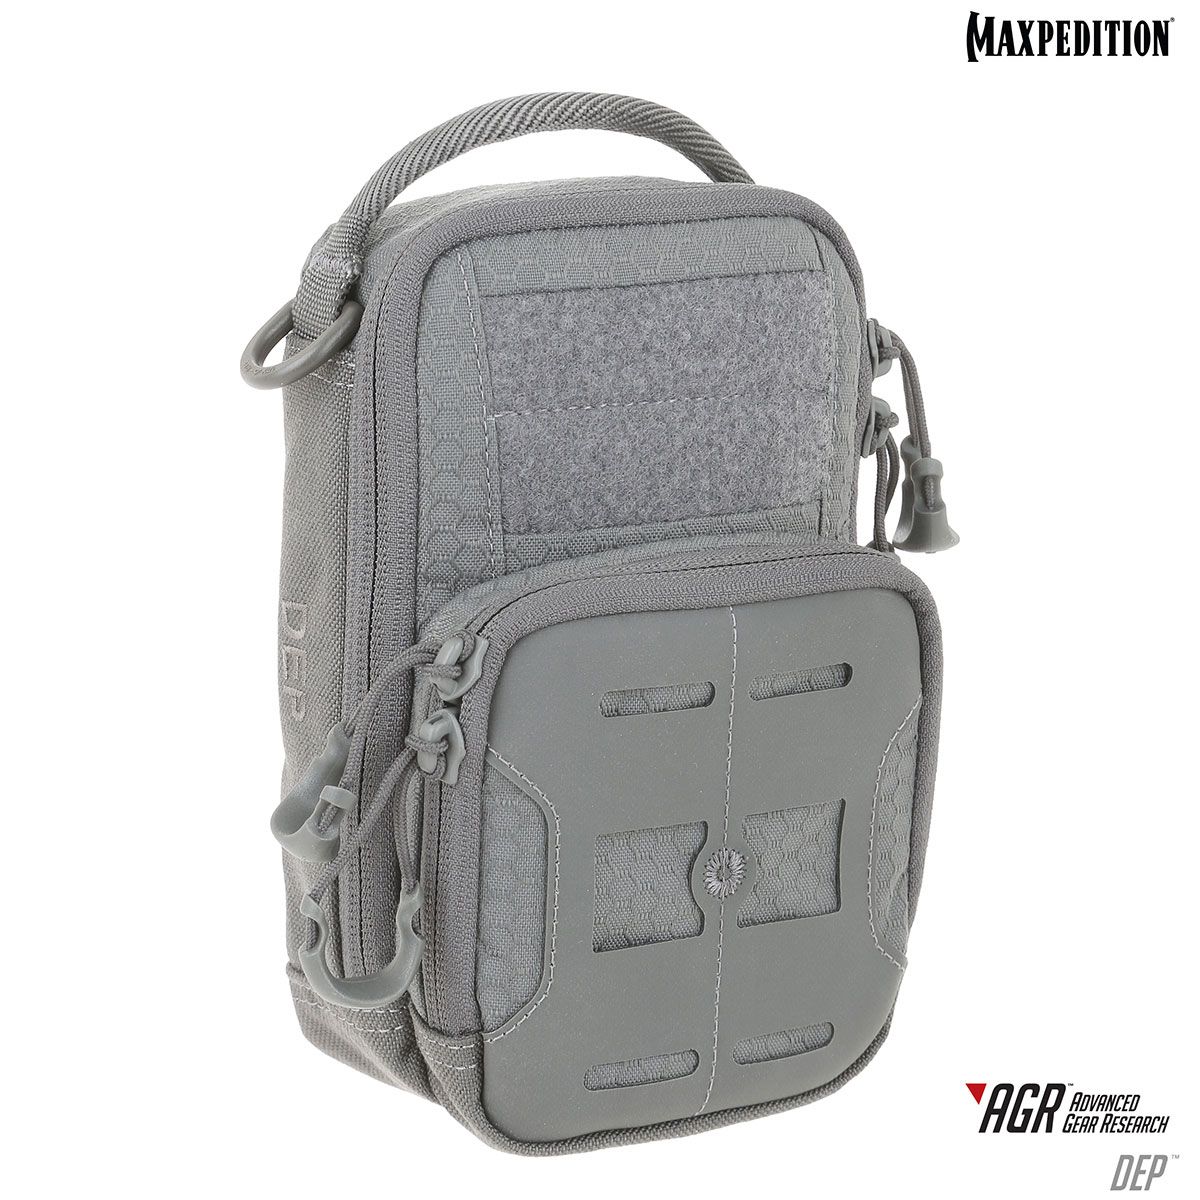 Maxpedition DEP Daily Essentials Pouch Black 